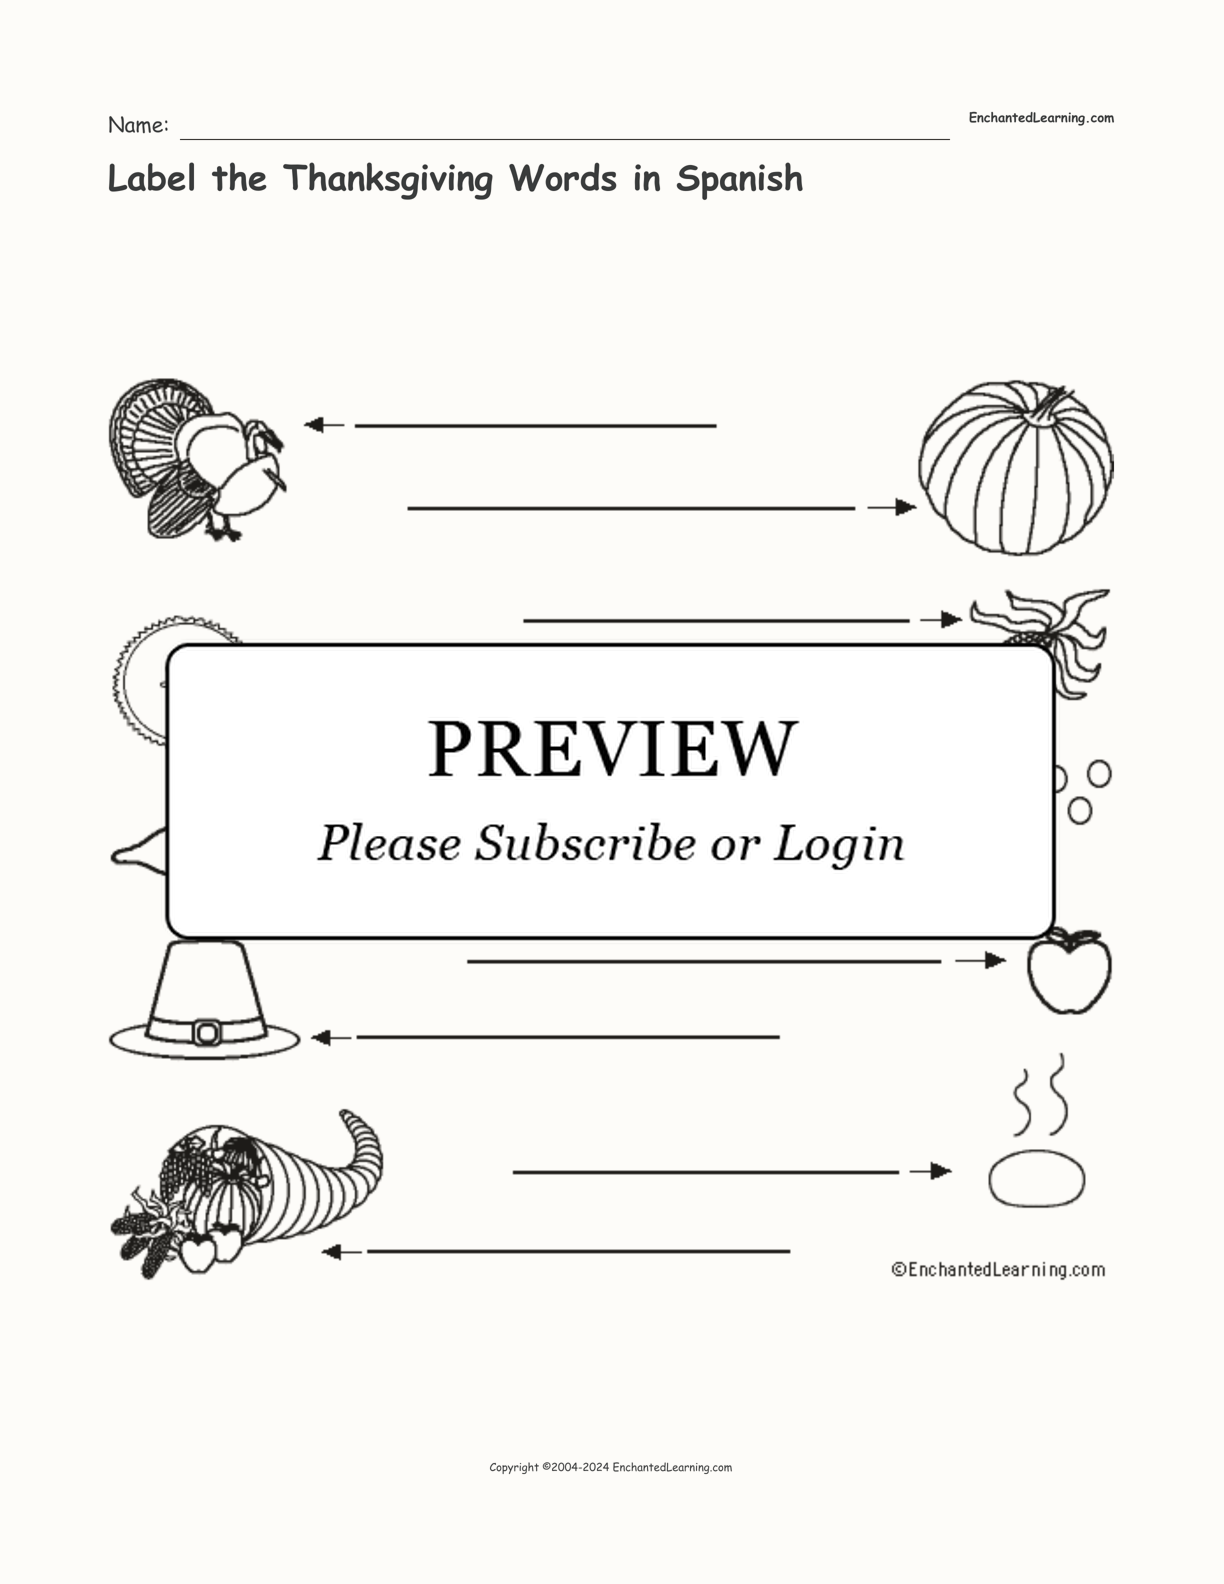 Label the Thanksgiving Words in Spanish interactive worksheet page 1